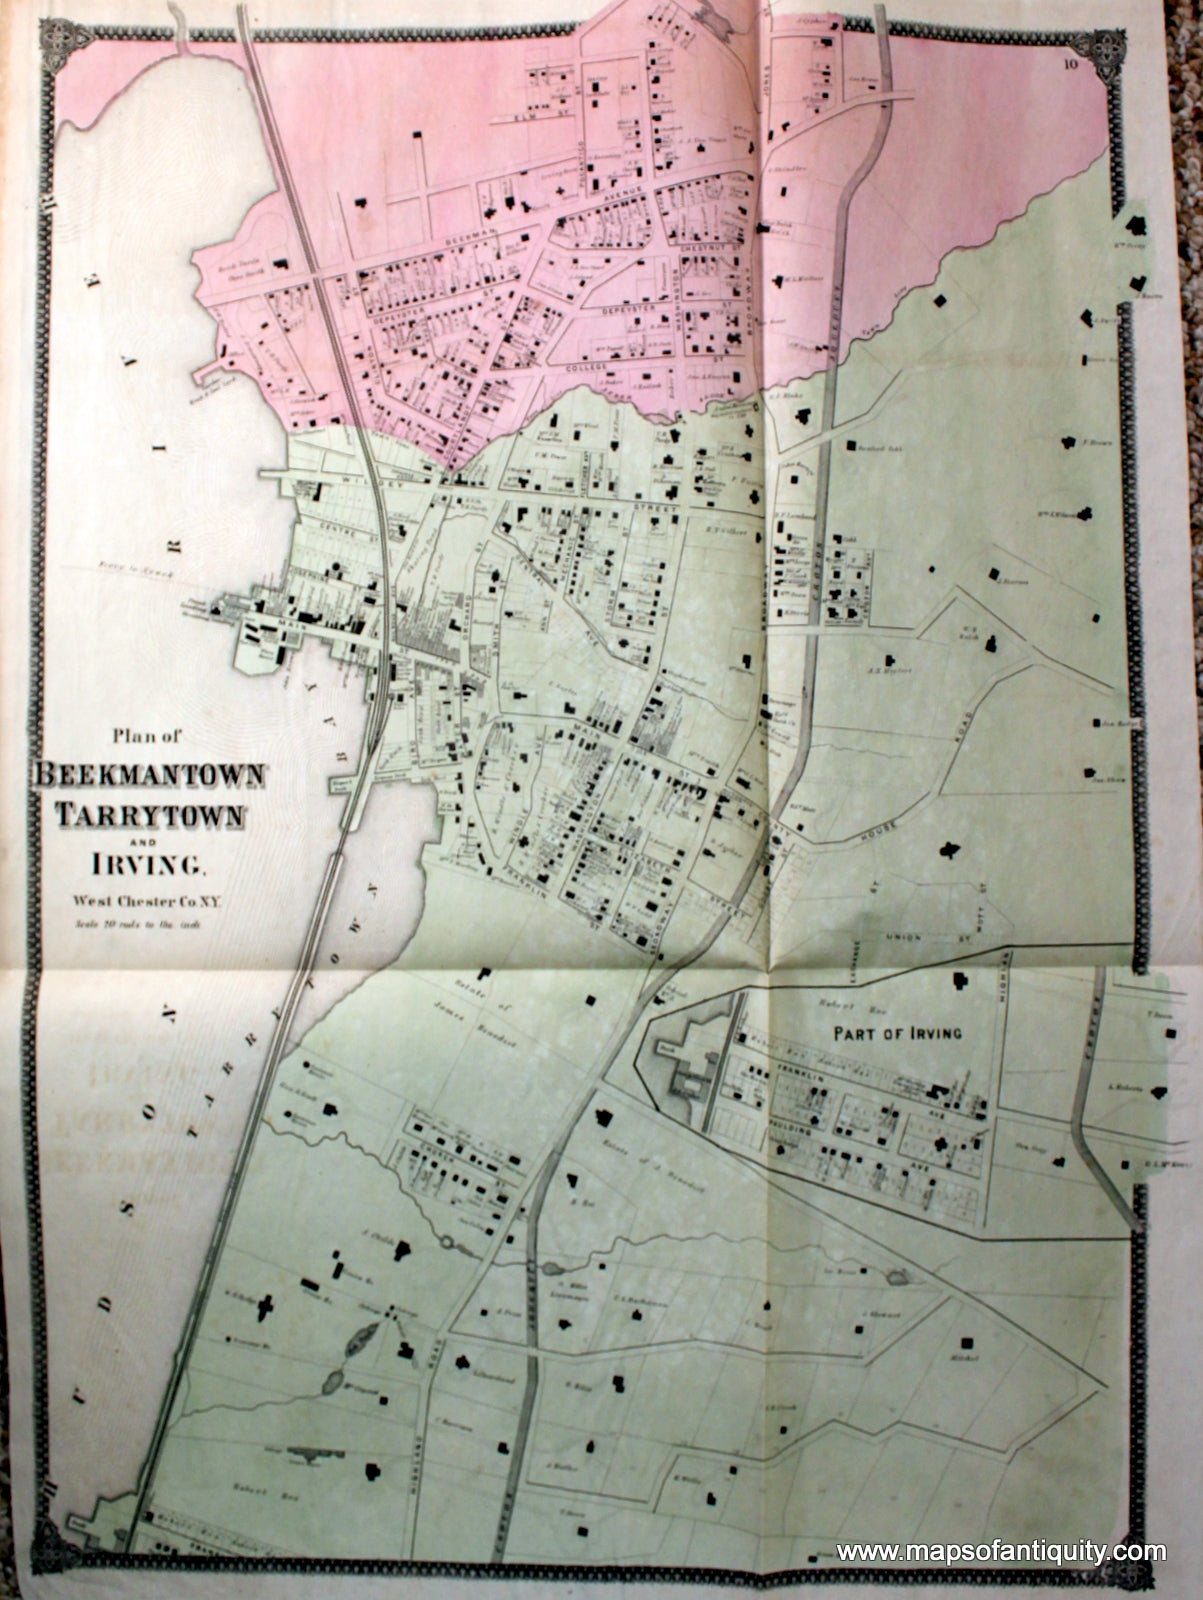 Antique-Hand-Colored-Map-Plan-of-Beekmantown-Tarrytown-and-Irving-Westchester-Co.-N.Y.-United-States-Northeast-1867-Beers-Maps-Of-Antiquity